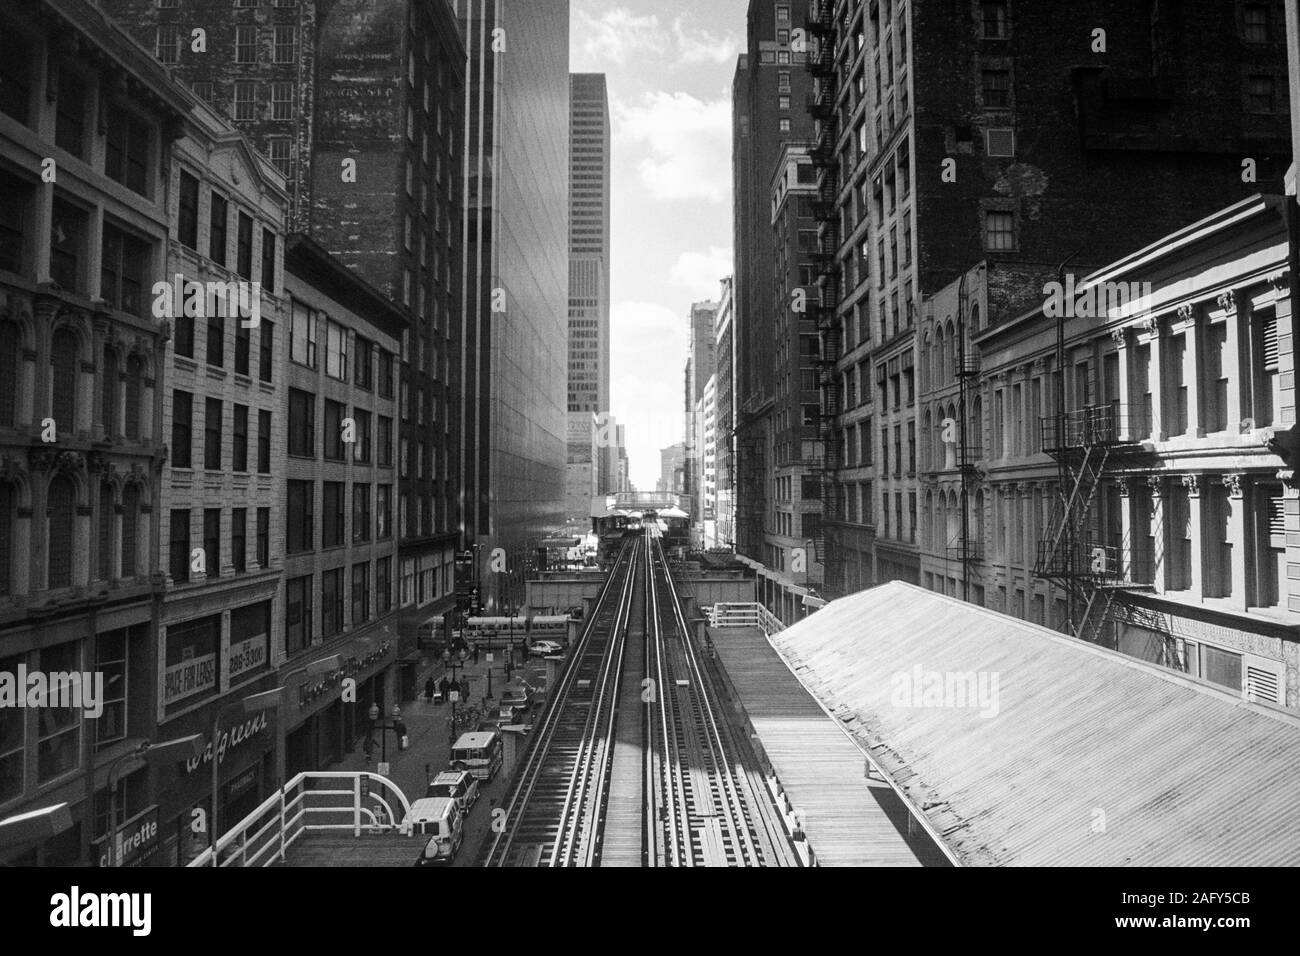 Chicago, Illinois, USA - 1996:  Archival black and white view of downtown architecture and elevated rail tracks along Wasbash Ave. Stock Photo